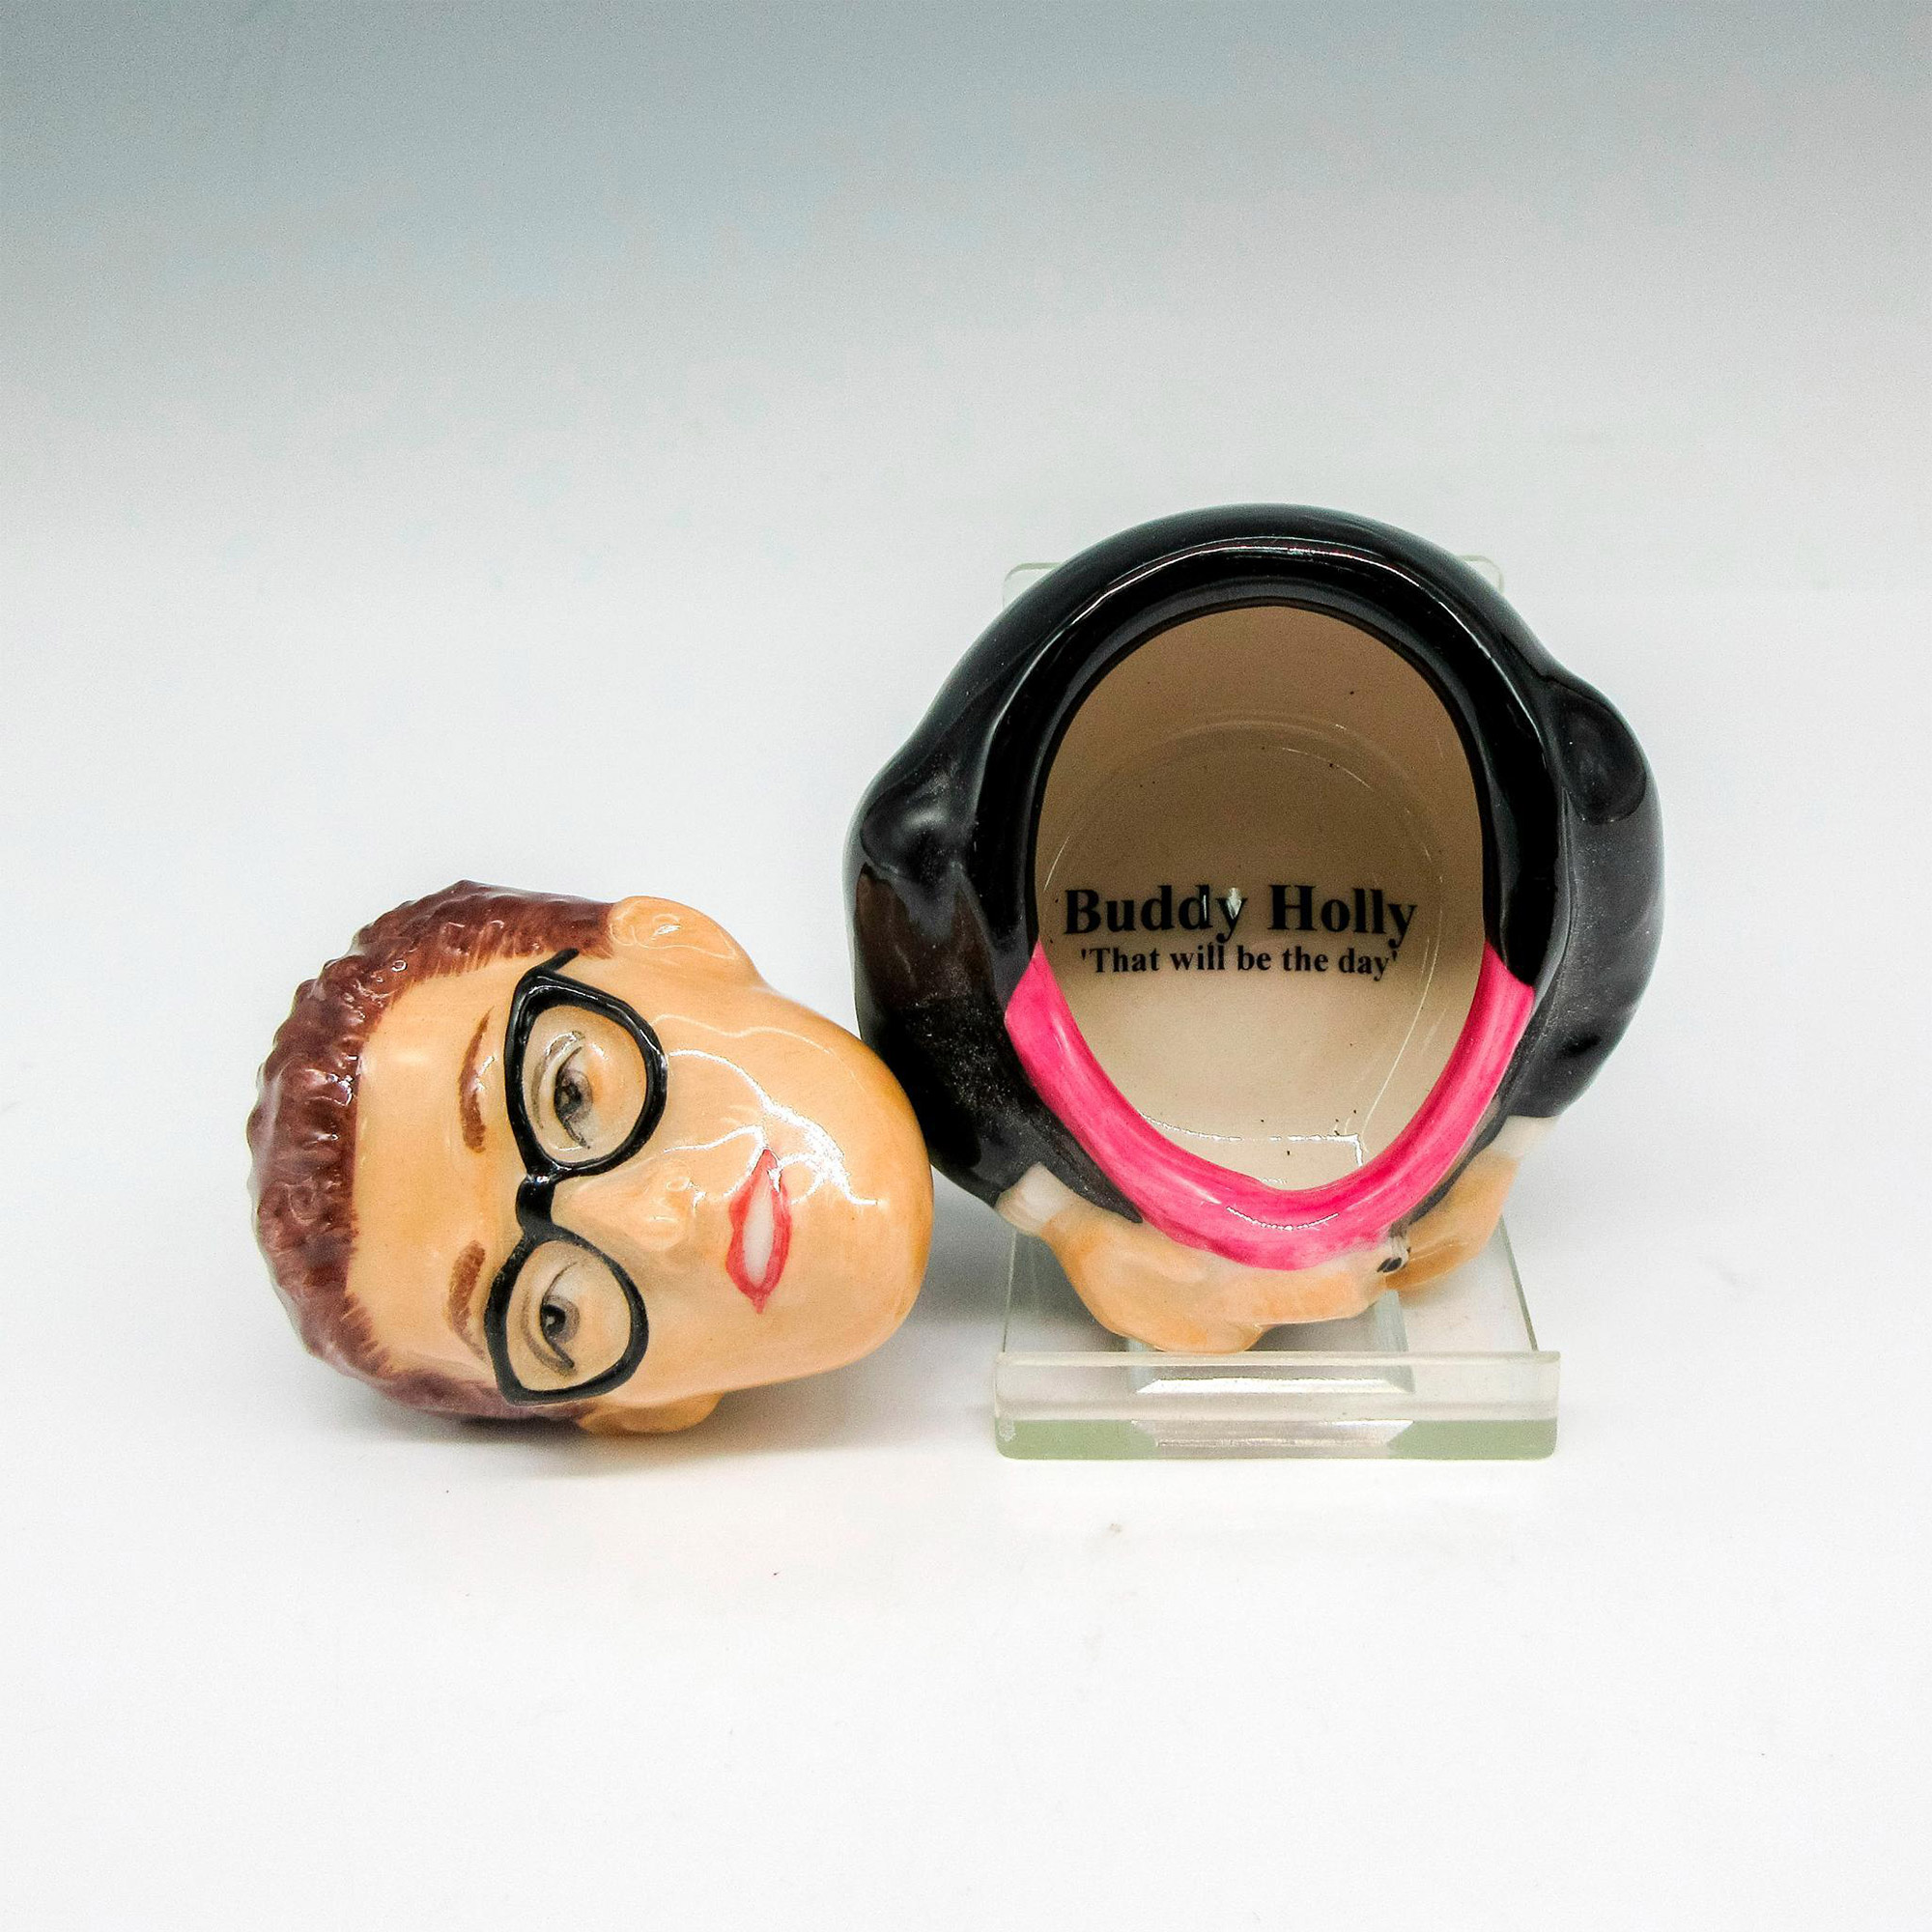 Kevin Francis Porcelain Face Pots, Buddy Holly - Image 2 of 4